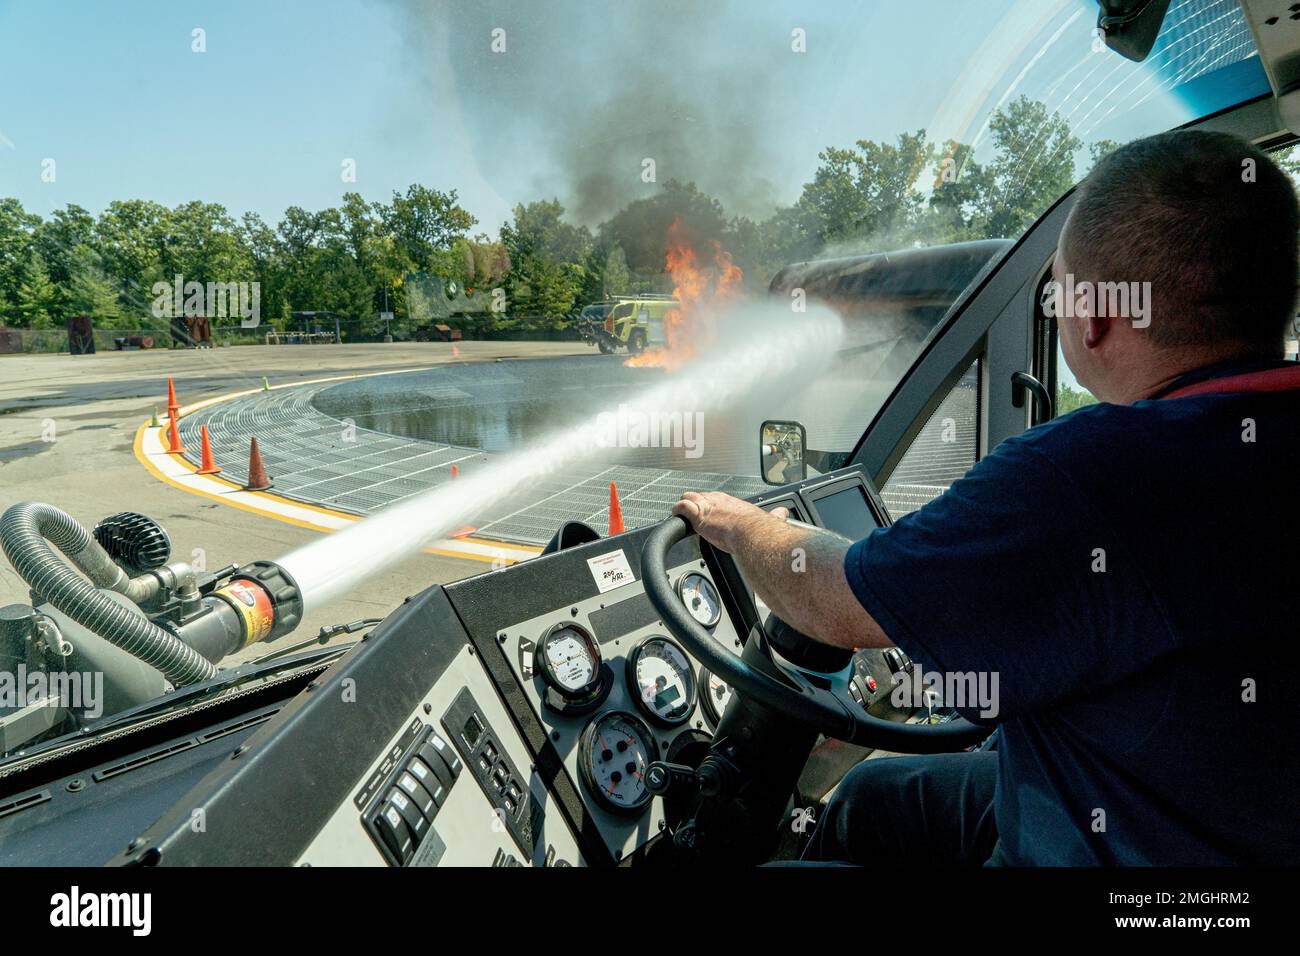 Firefighter John Russum from the 914th Air Refueling Wing's Fire Emergency Services controls a water cannon as he drives a fire truck towards a simulated Boeing 737 crash during training in Rochester, New York, August 24, 2022. Training for an aircraft fire enhances readiness of our firefighters by giving them hands on experience on how to suppress and ultimately put out the flames as quickly as possible to prevent further damage or injuries. Stock Photo